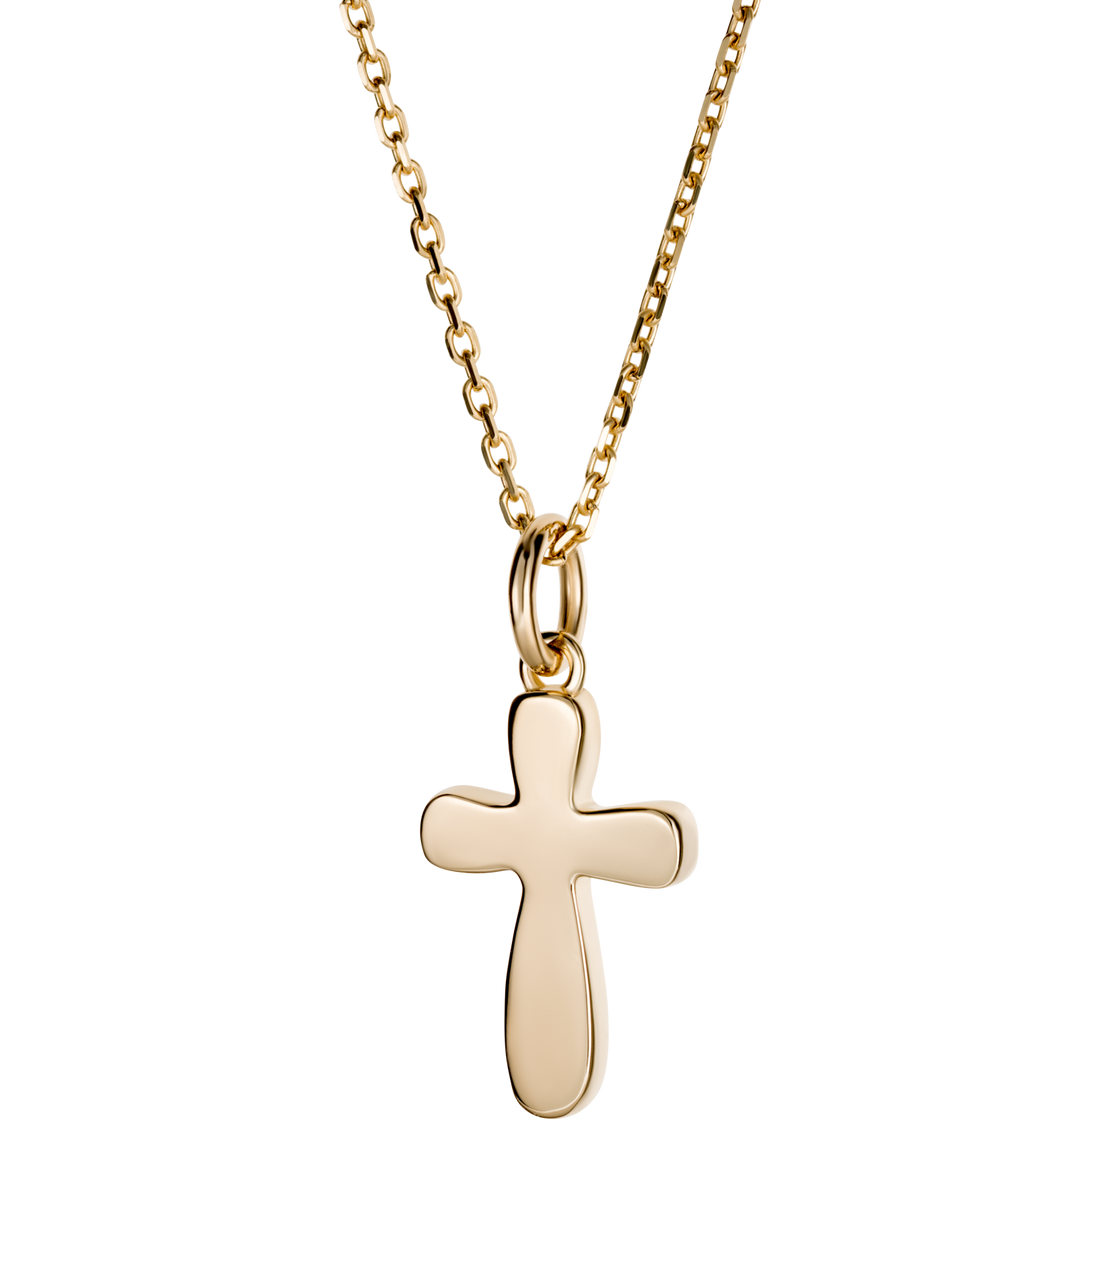 Rounded Cross, Children's Necklace for Boys - 14K Gold